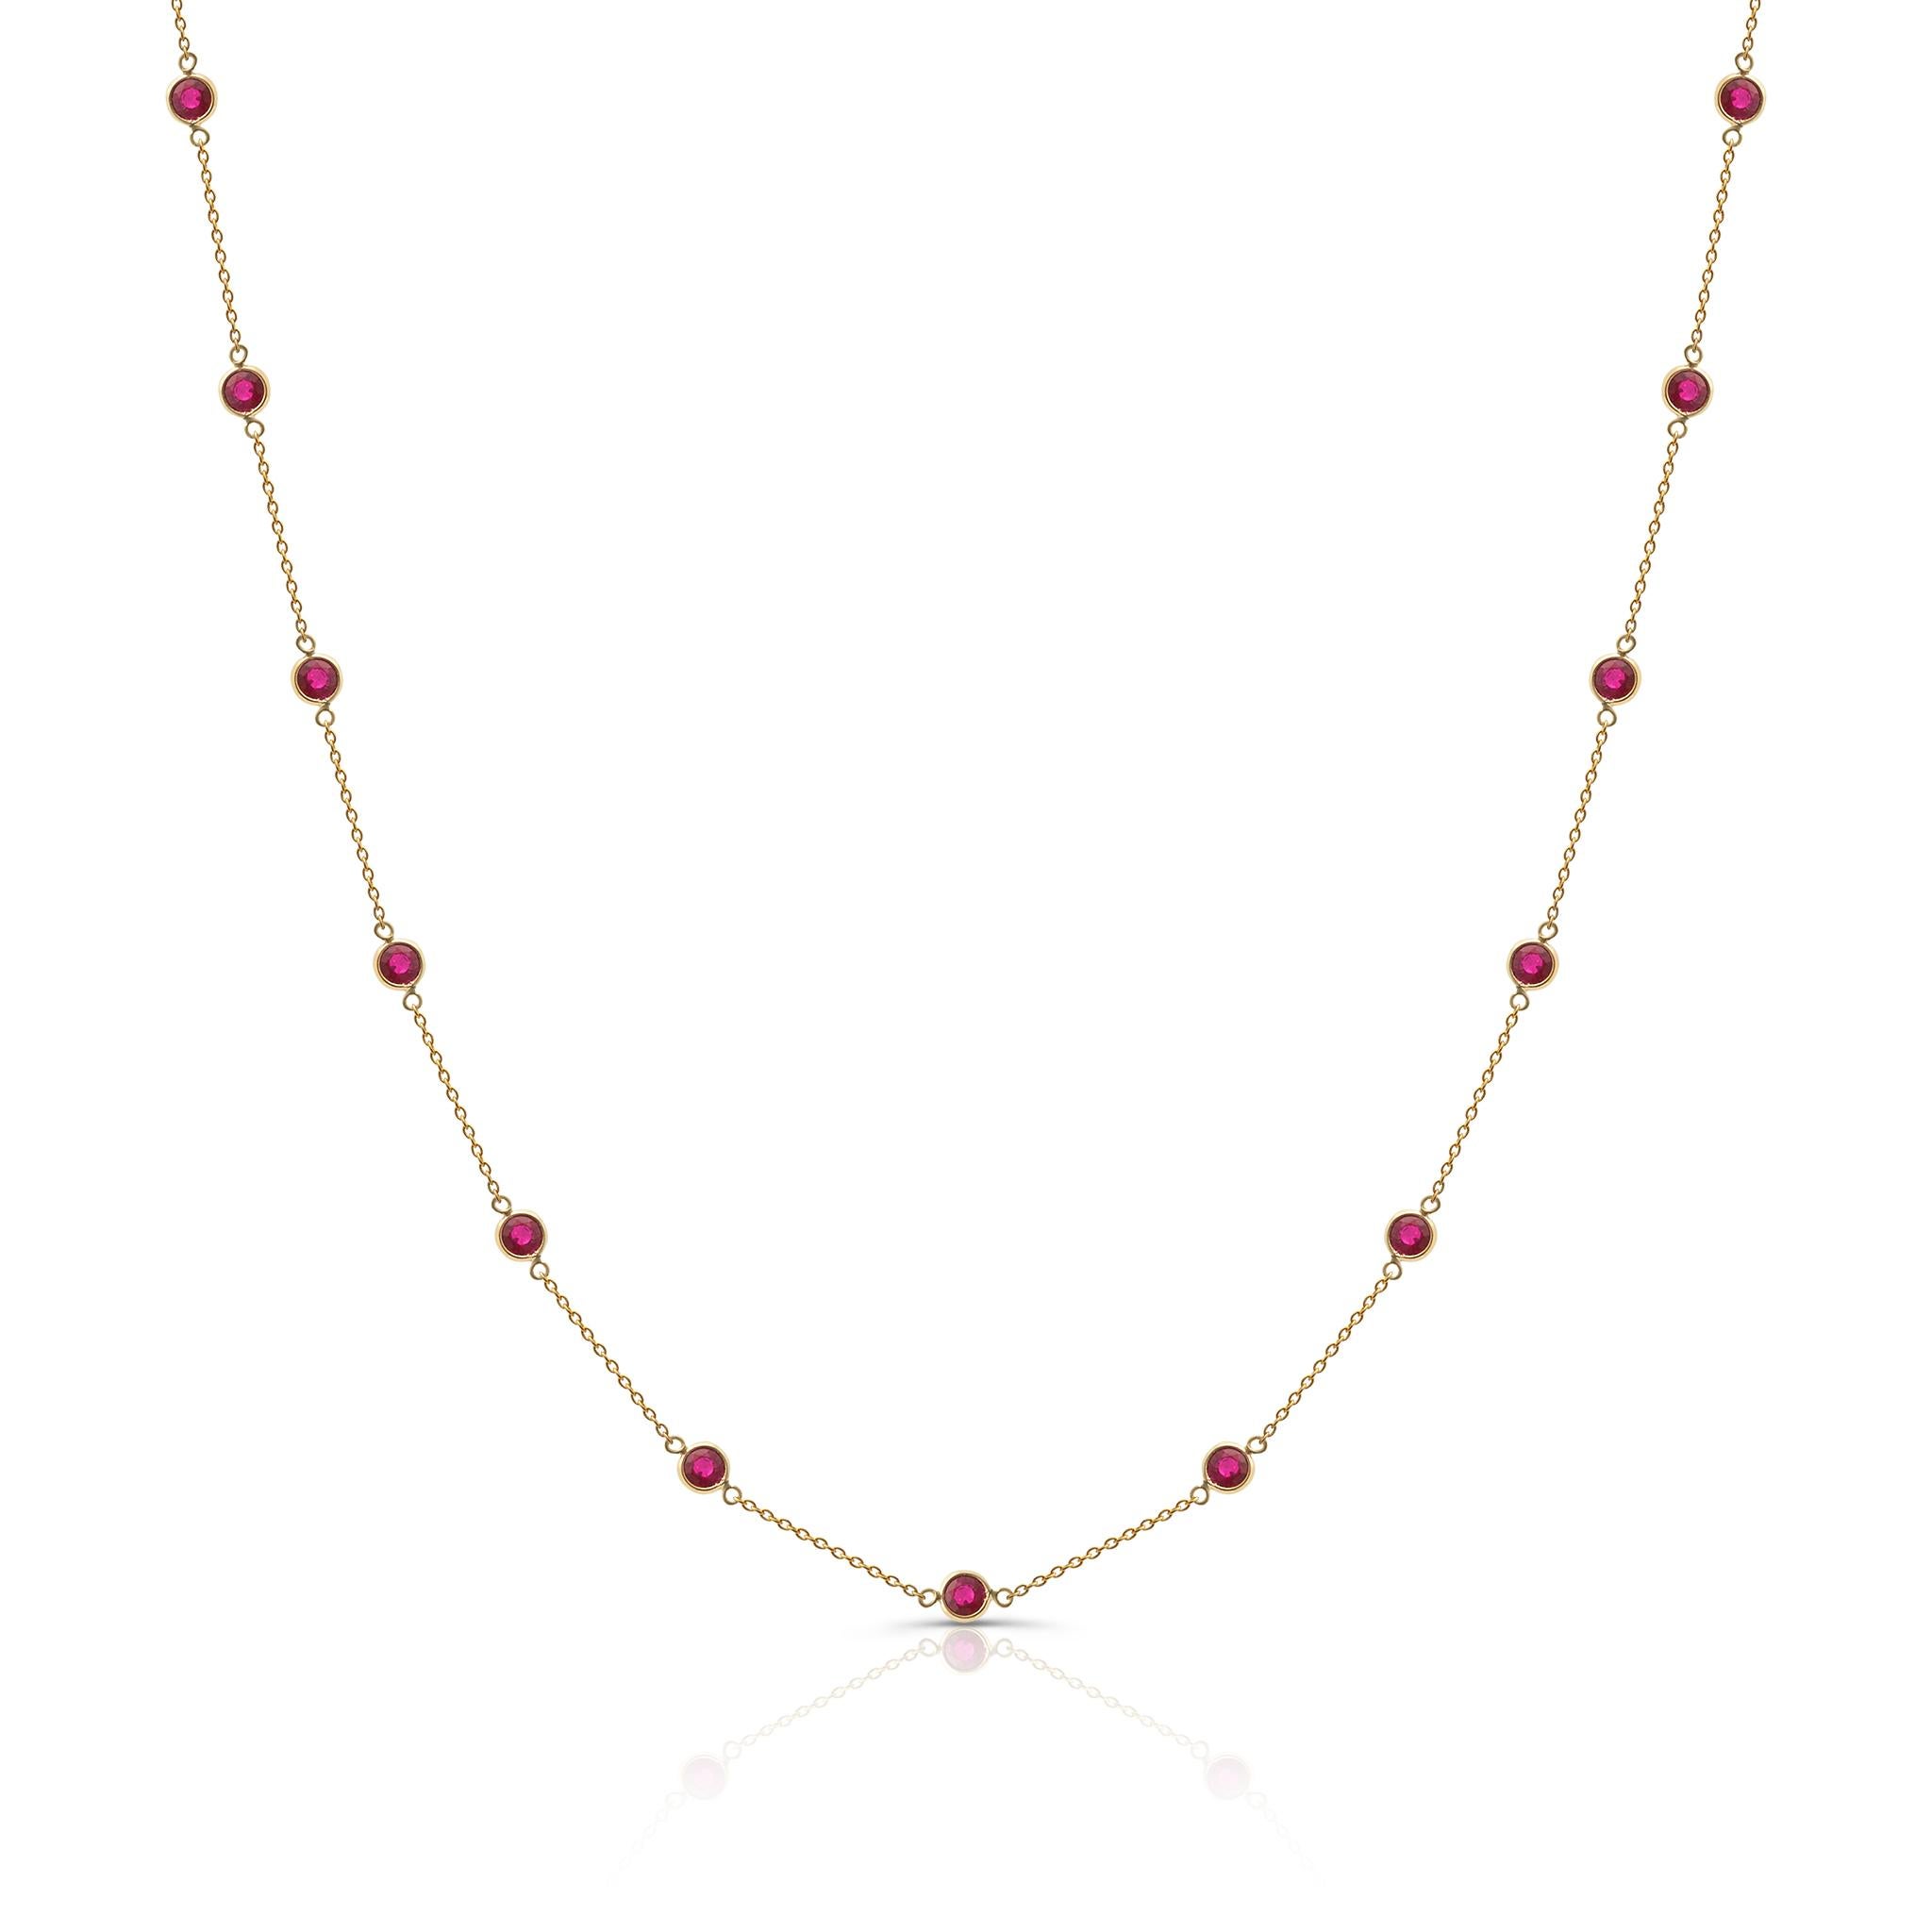 Tresor Beautiful Necklace features 2.69 carats of Ruby. The Necklace are an ode to the luxurious yet classic beauty with sparkly gemstones and feminine hues. Their contemporary and modern design make them versatile in their use. The Necklace are